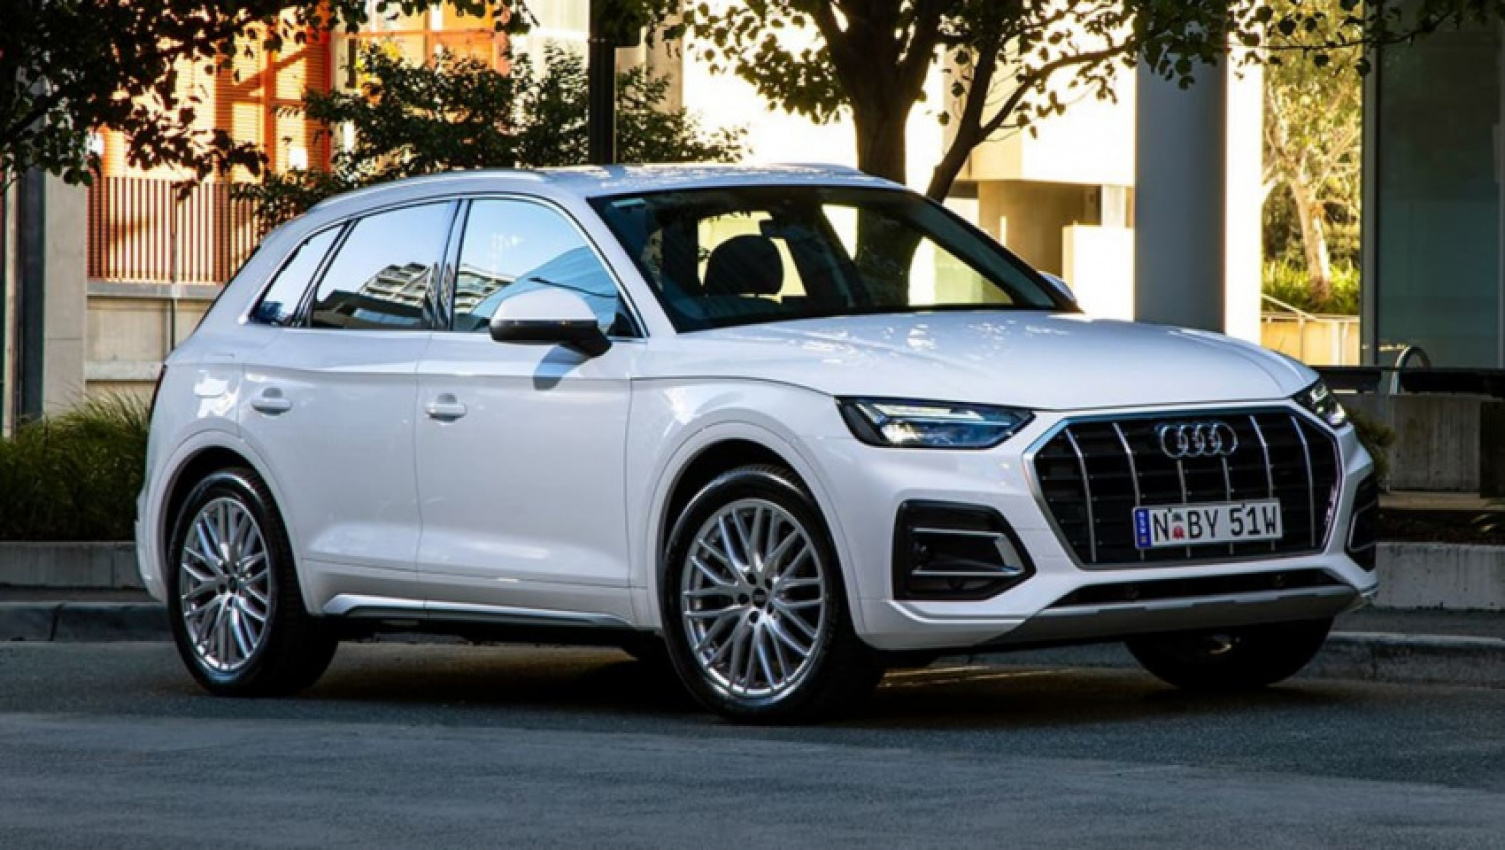 audi, autos, bmw, cars, mercedes-benz, audi news, audi q5, audi q5 2022, bmw x3, industry news, mercedes, mercedes-benz glc, showroom news, android, 2022 audi q5 pricing and specs detailed: new diesel engine arrives to undercut bmw x3 and mercedes-benz glc